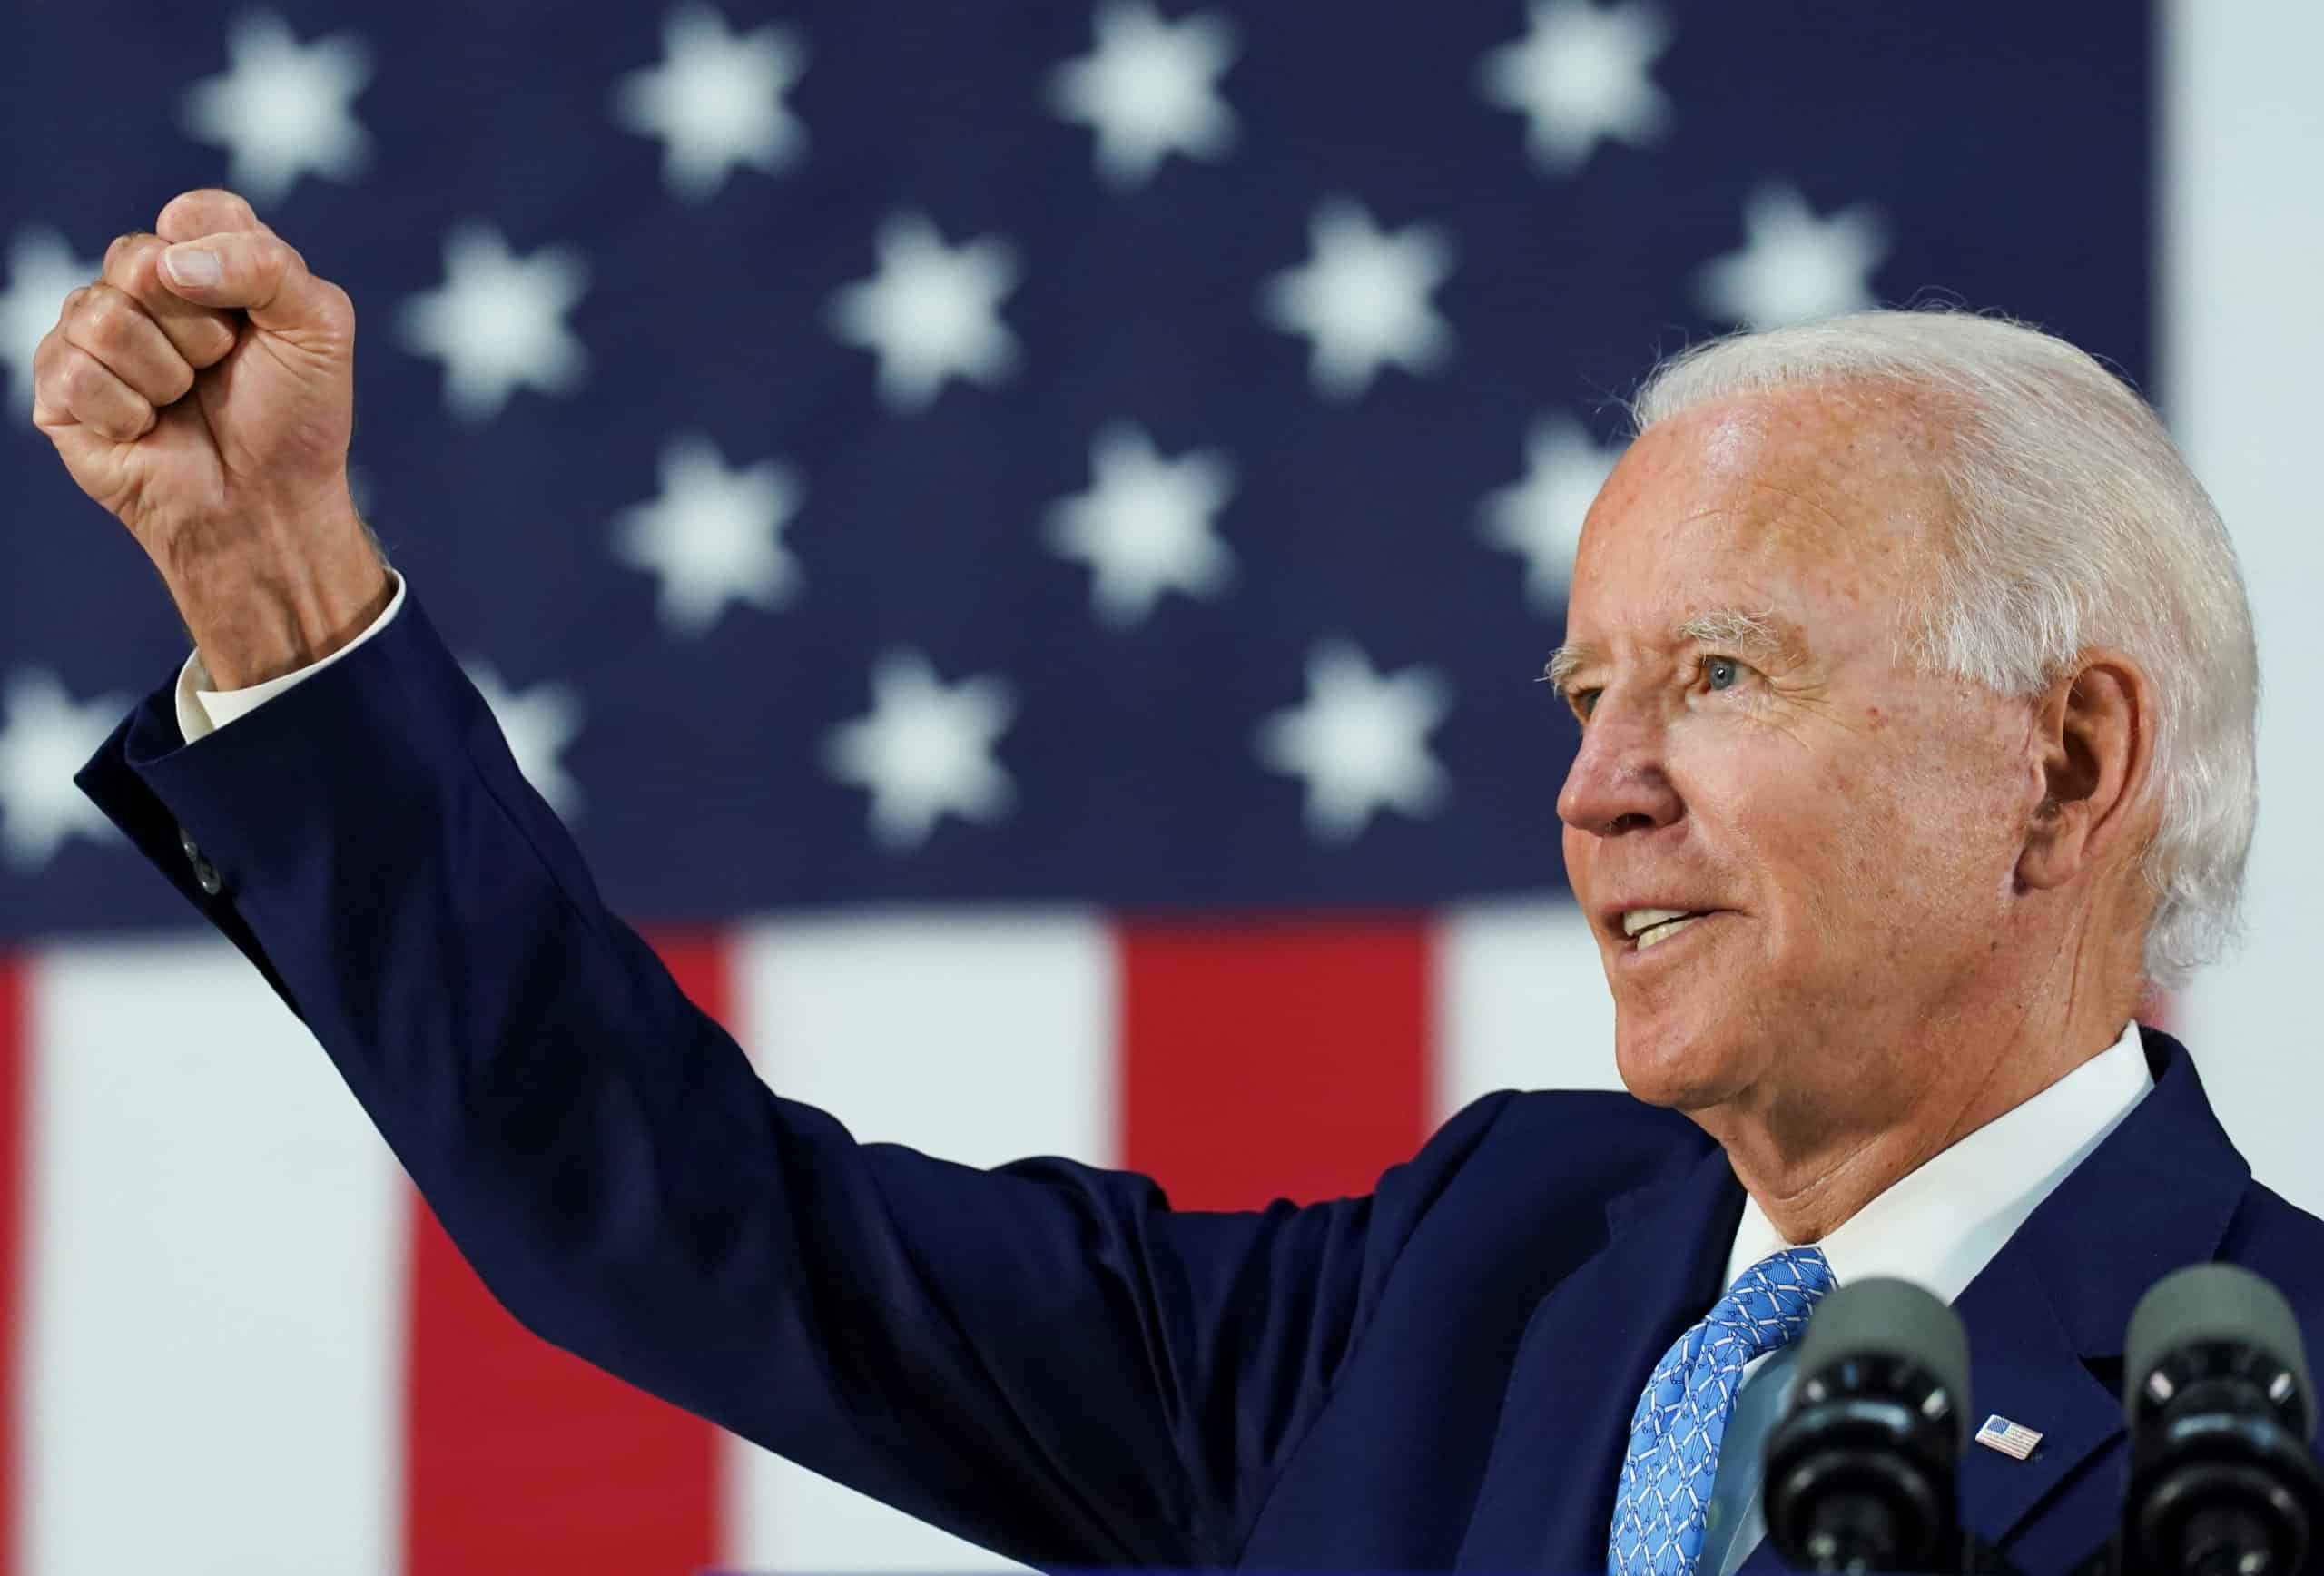 Biden Continues to Climb as Trump Falters in Battleground States